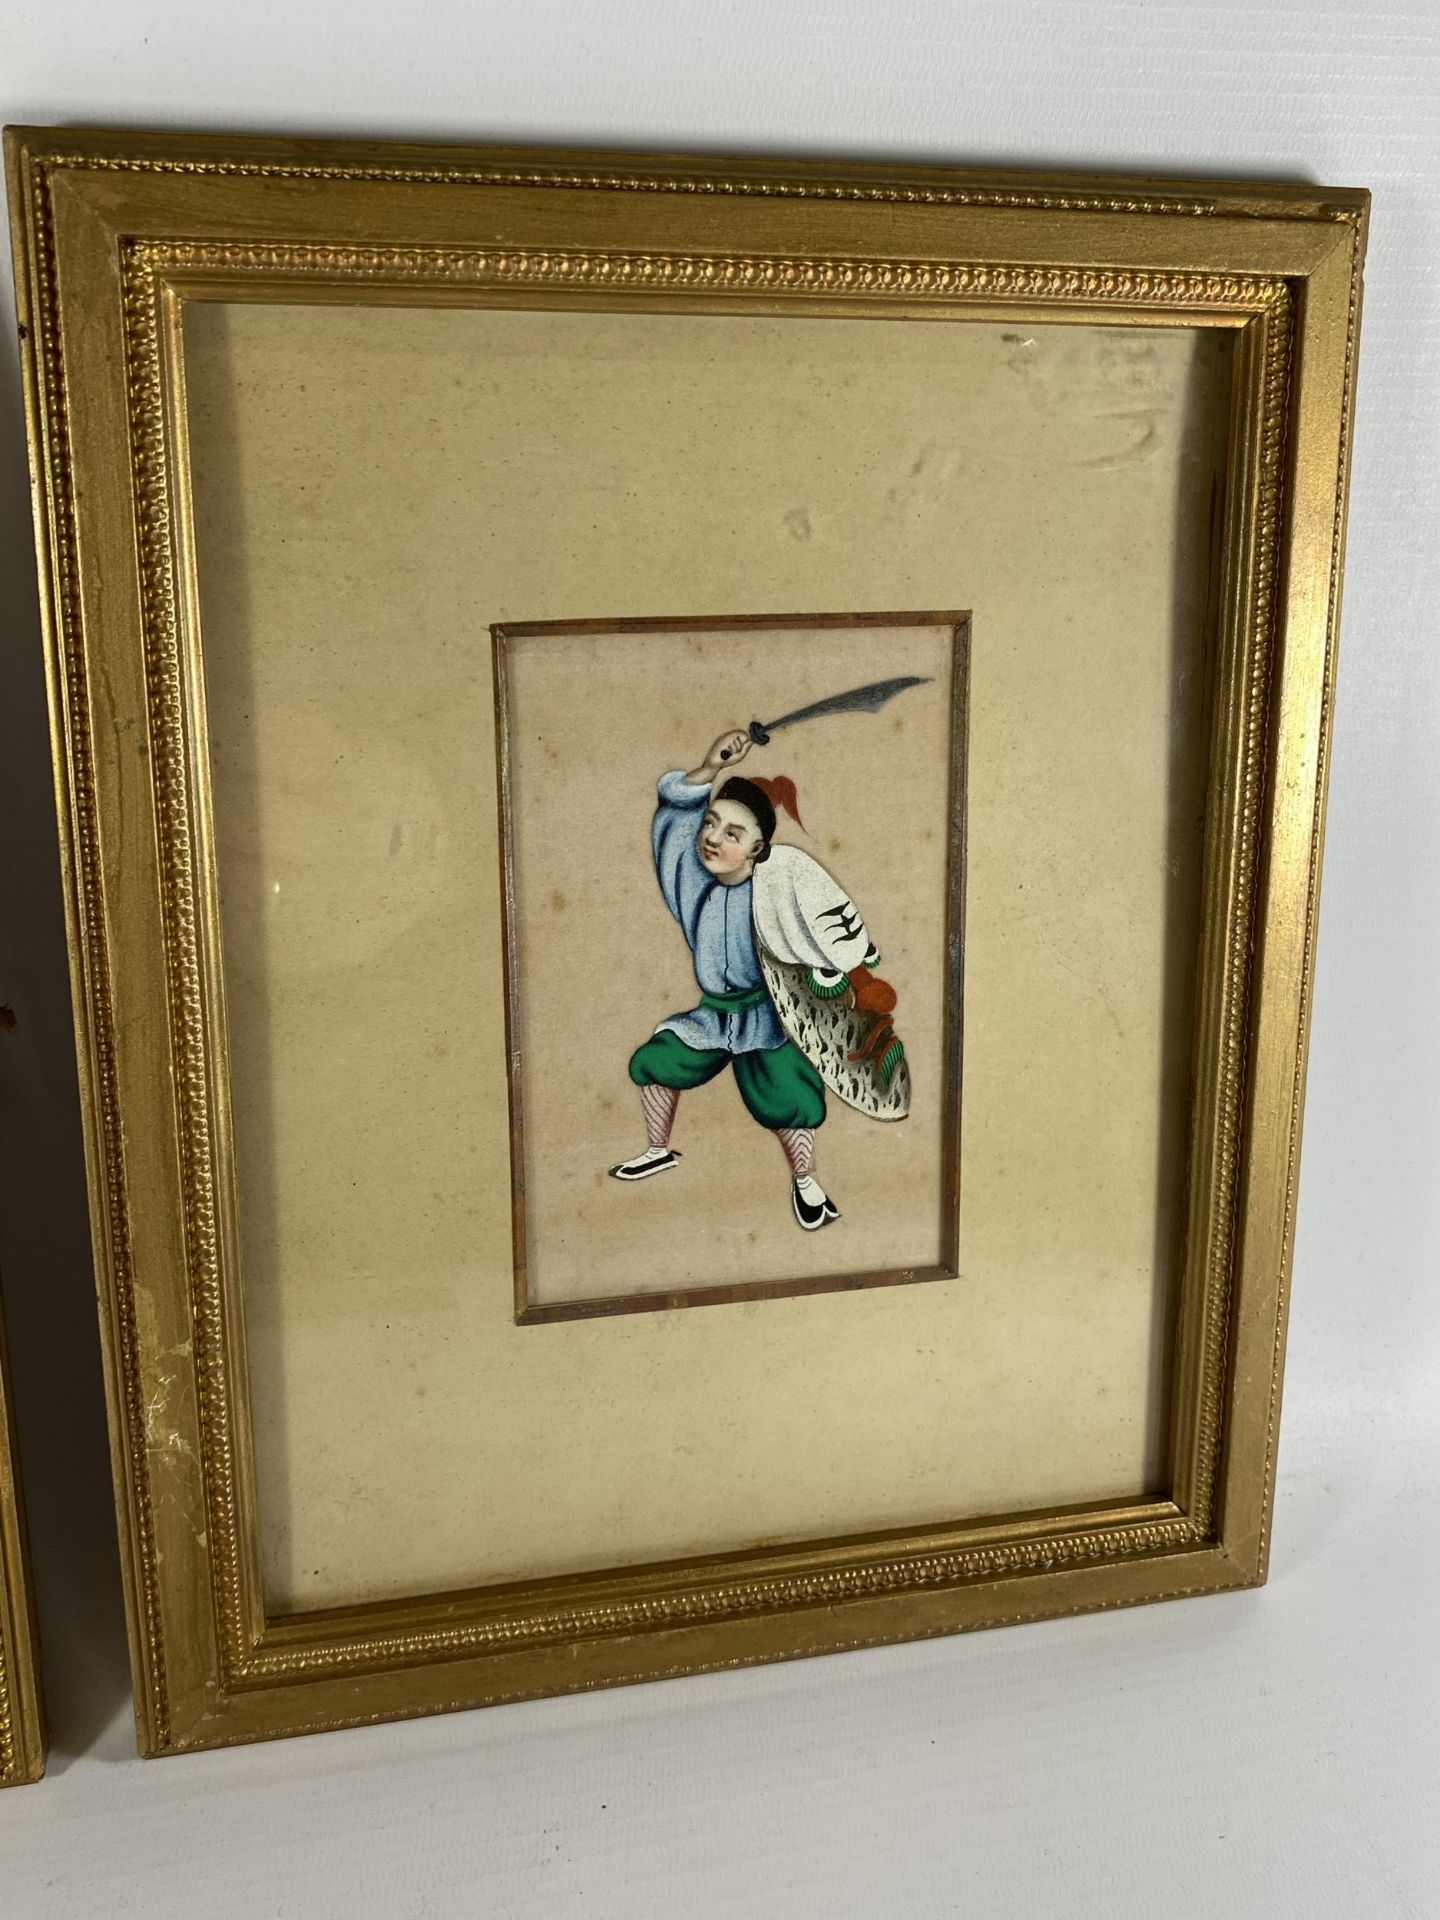 A PAIR OF 19TH CENTURY CHINESE RICE PAPER PAINTINGS IN GILT FRAMES, 29 X 24CM - Image 3 of 6